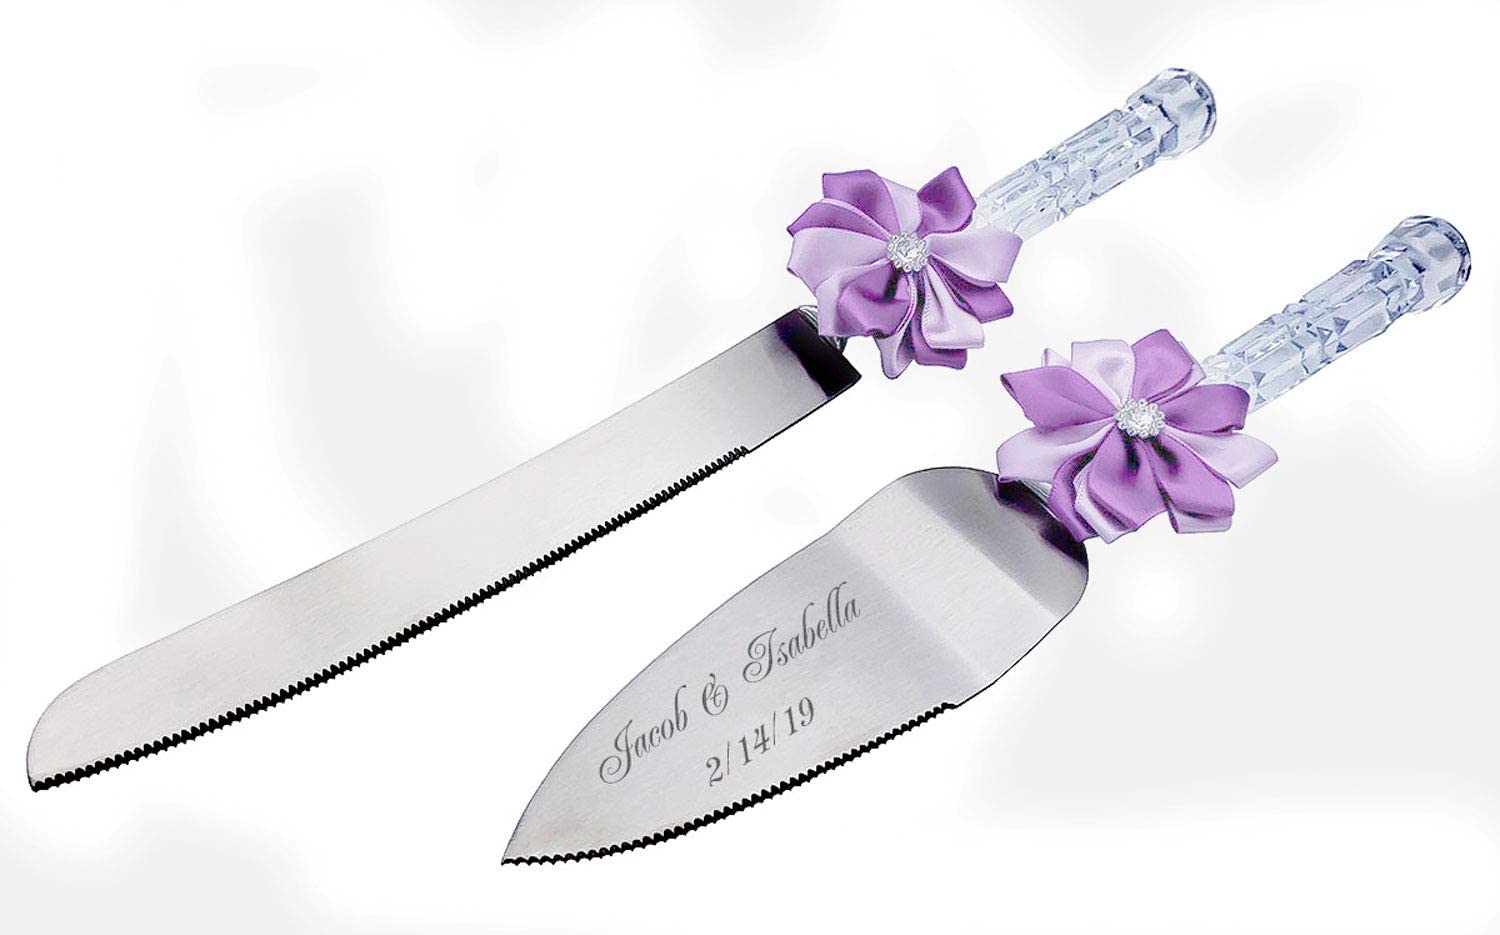 GIFTS INFINITY 12" Personalized Wedding Cake Knife and 10" Server Set Free Engraving Purple Bow